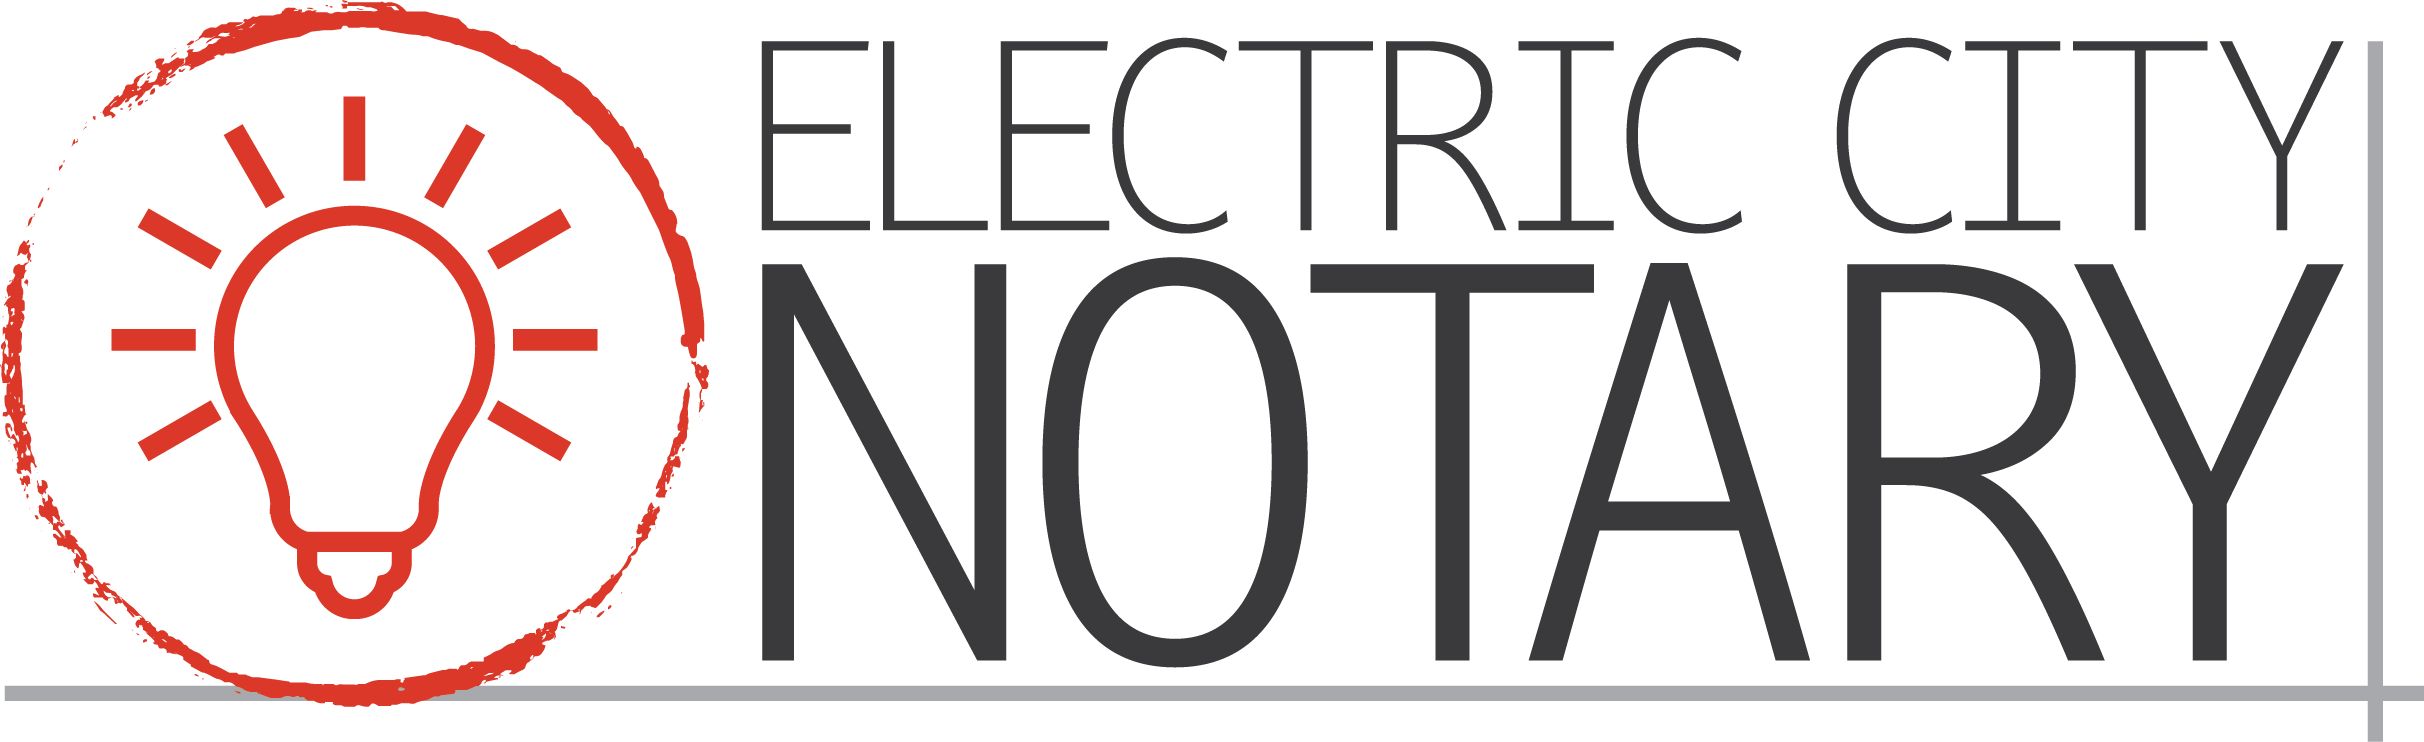 Electric City Notary